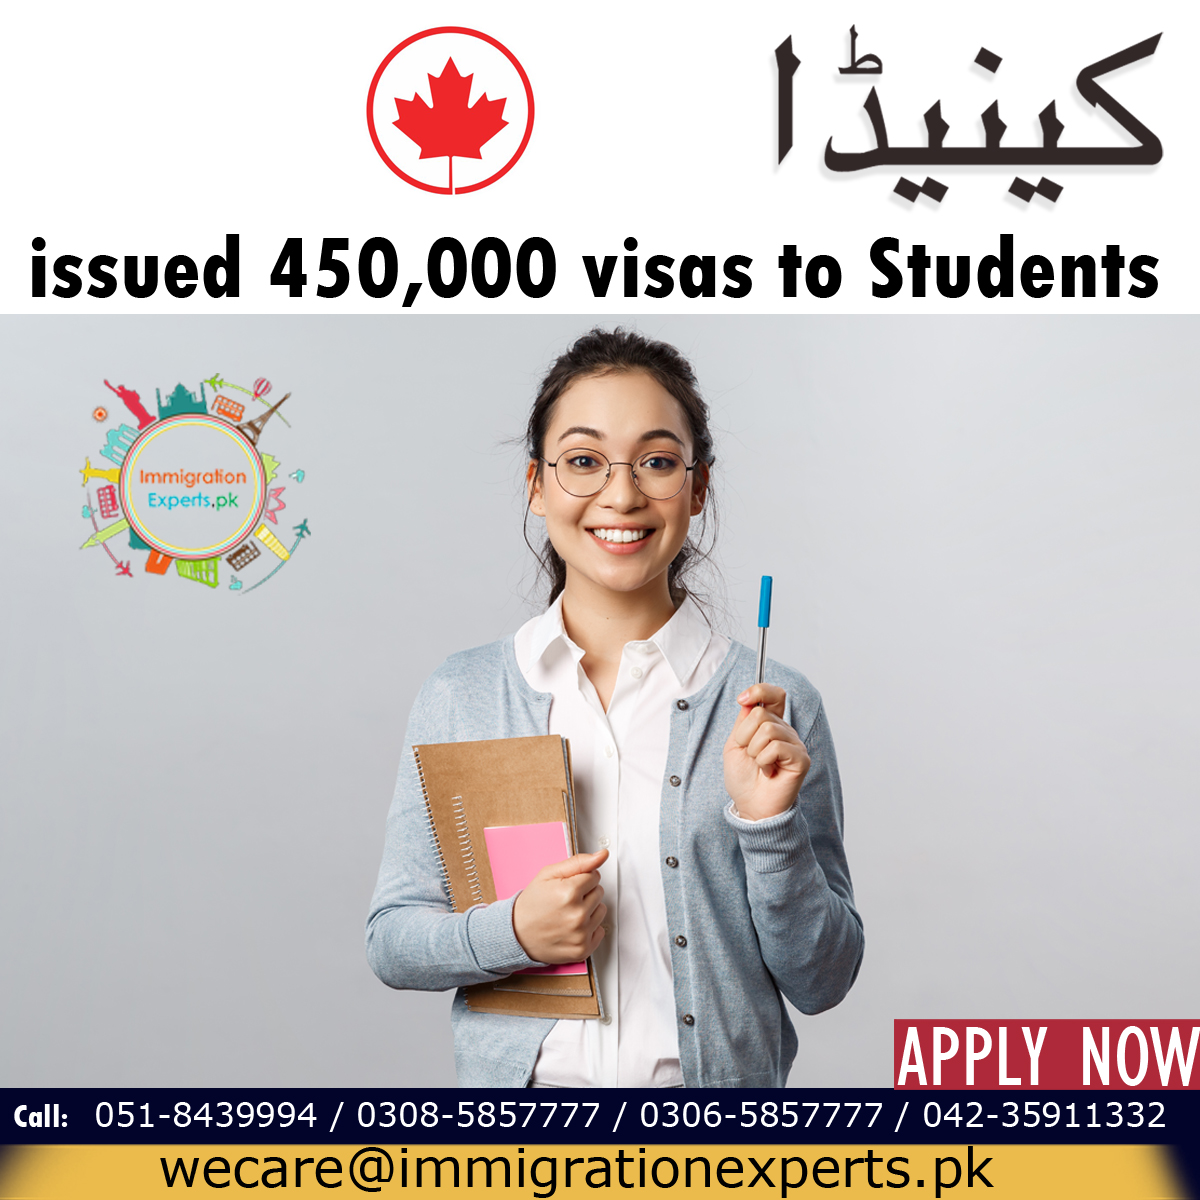 Canada issued 450,000 new study permits to international students